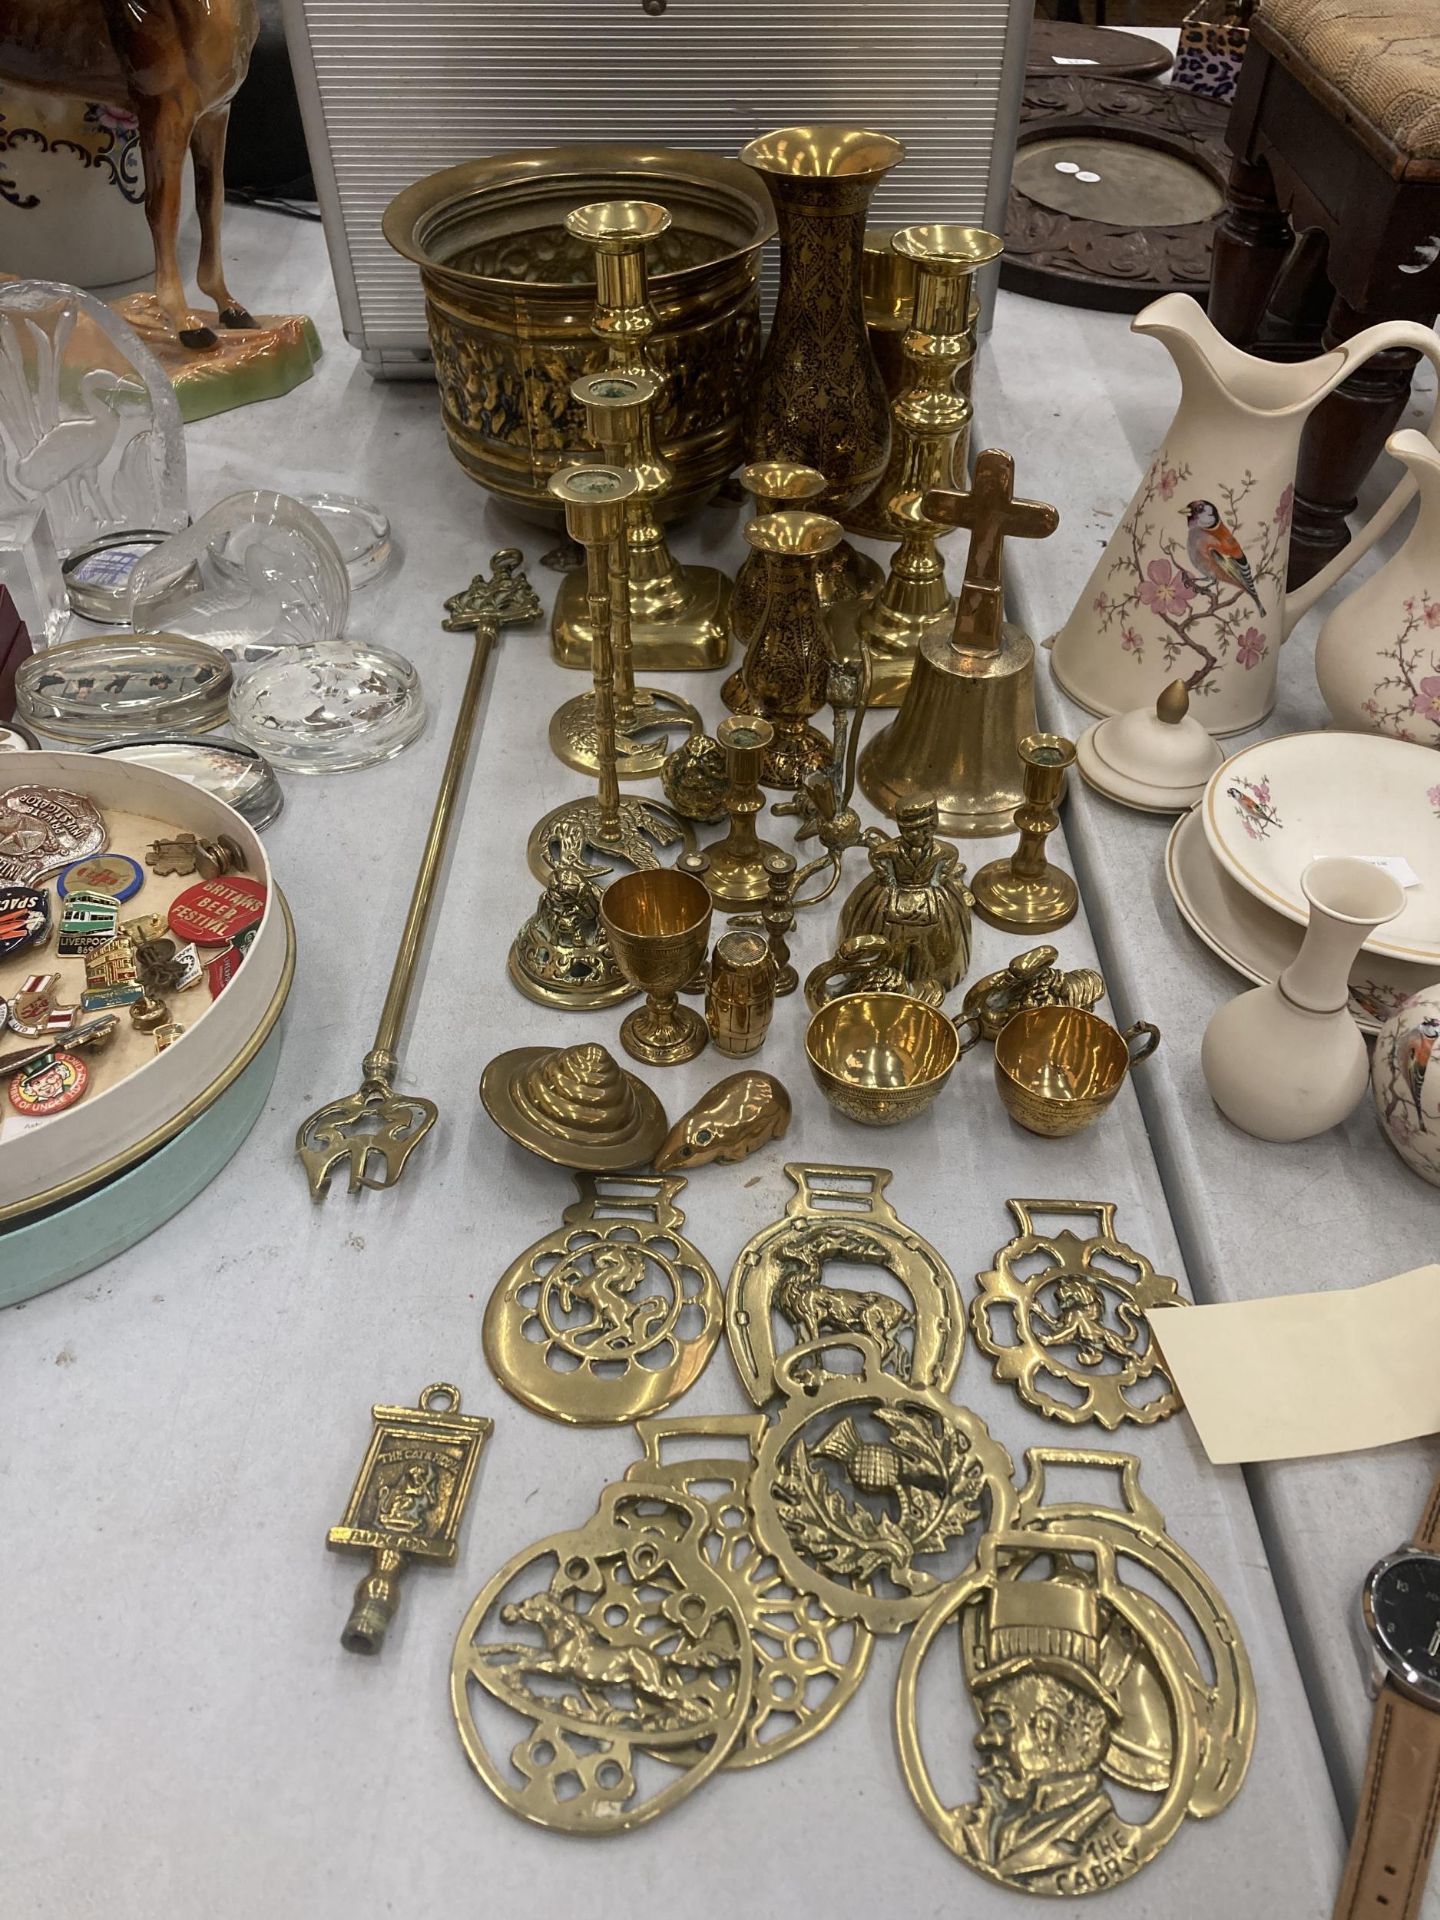 A LARGE COLLECTION OF BRASSWARE TO INCLUDE A PLANTER, CANDLESTICKS, VASES, FIGURES, HORSE BRASSES,